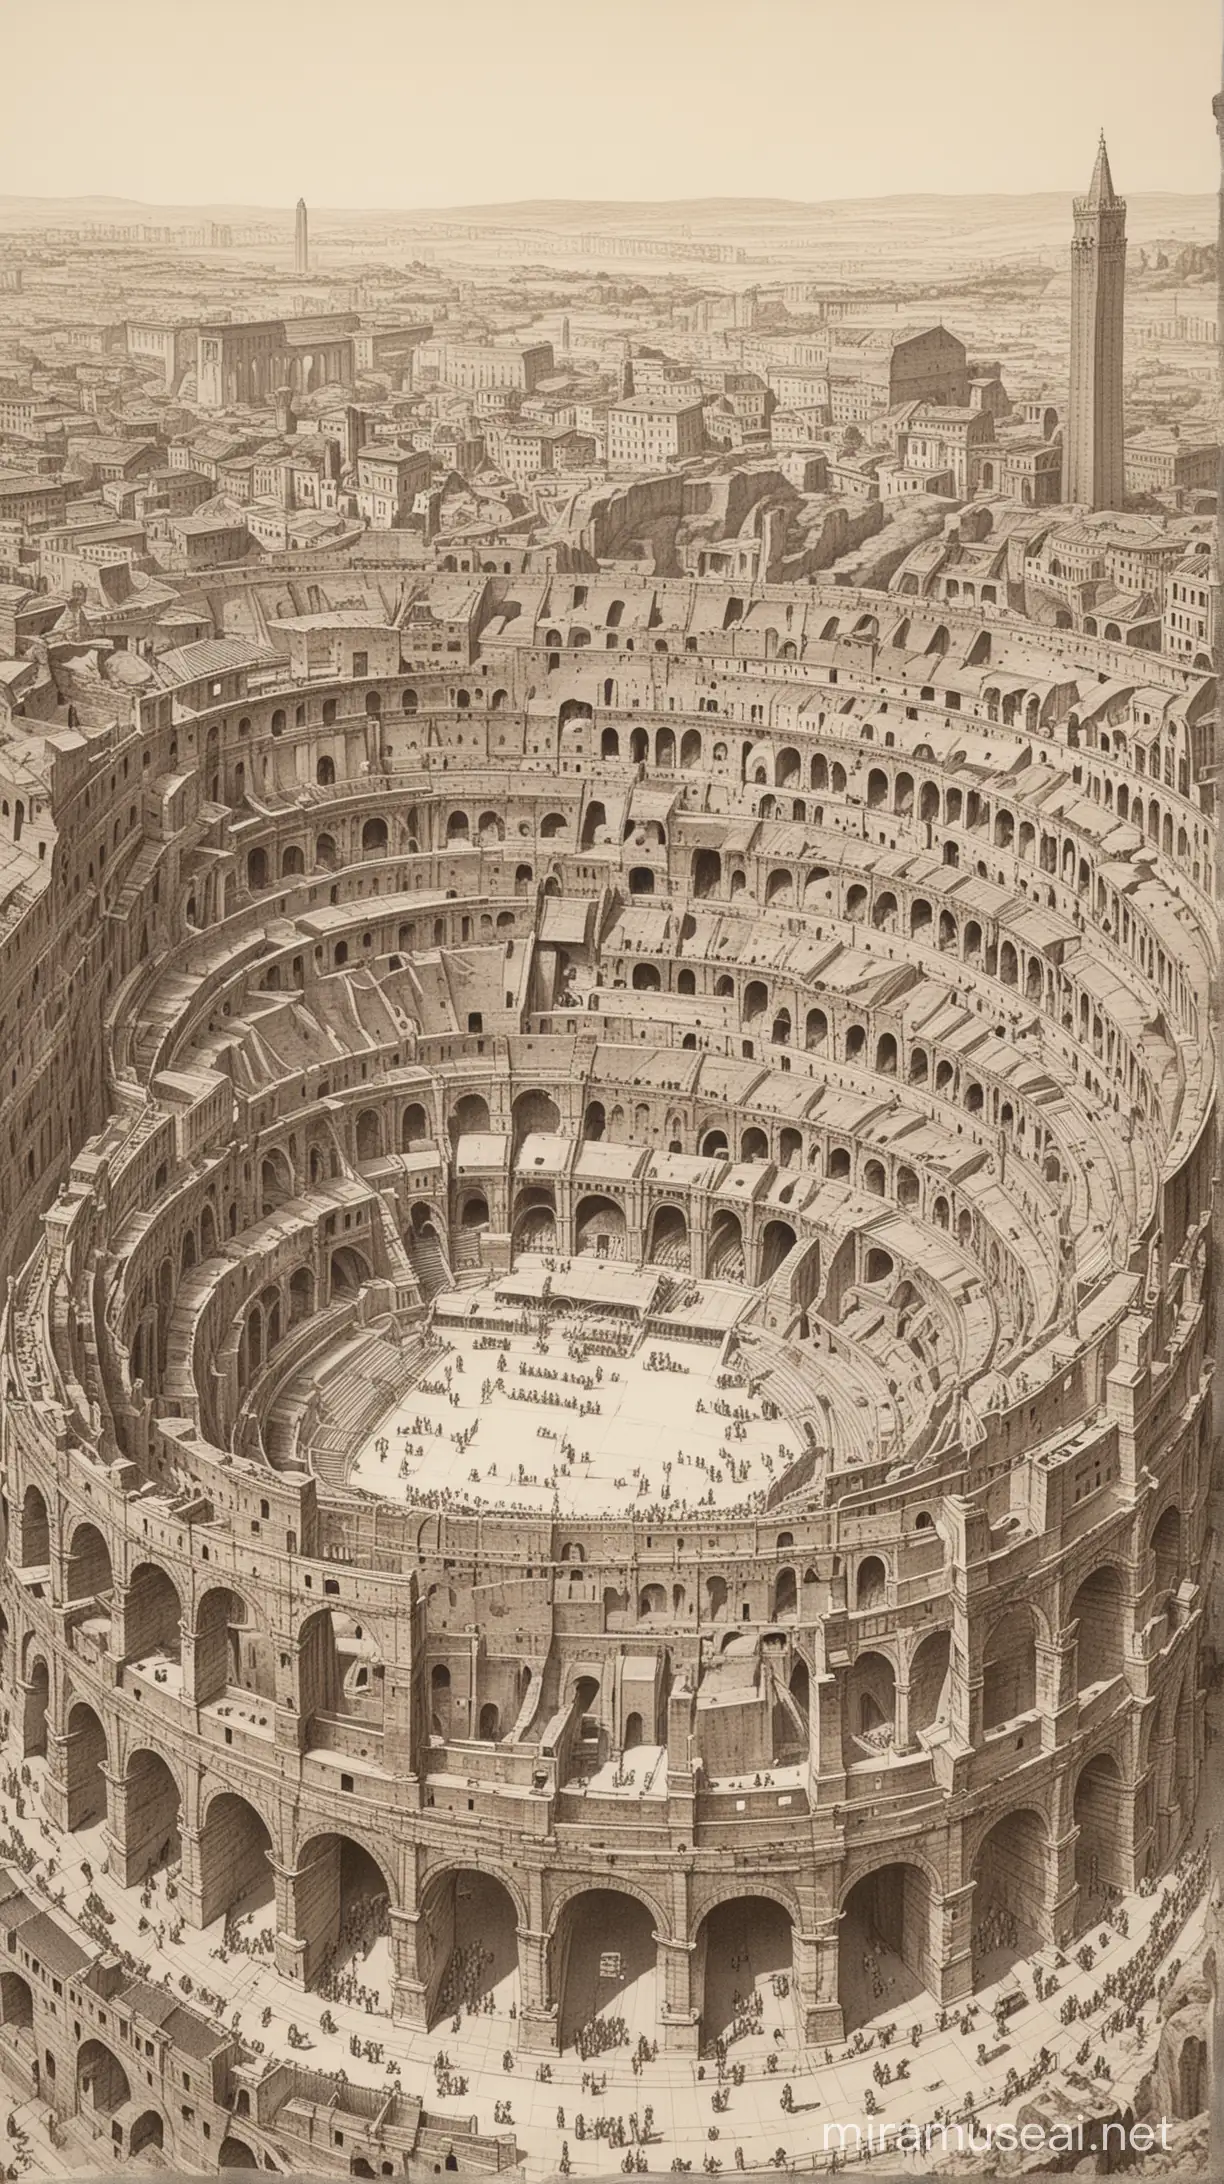 Masterful Roman Engineering Detailed Drawing of the Colosseum